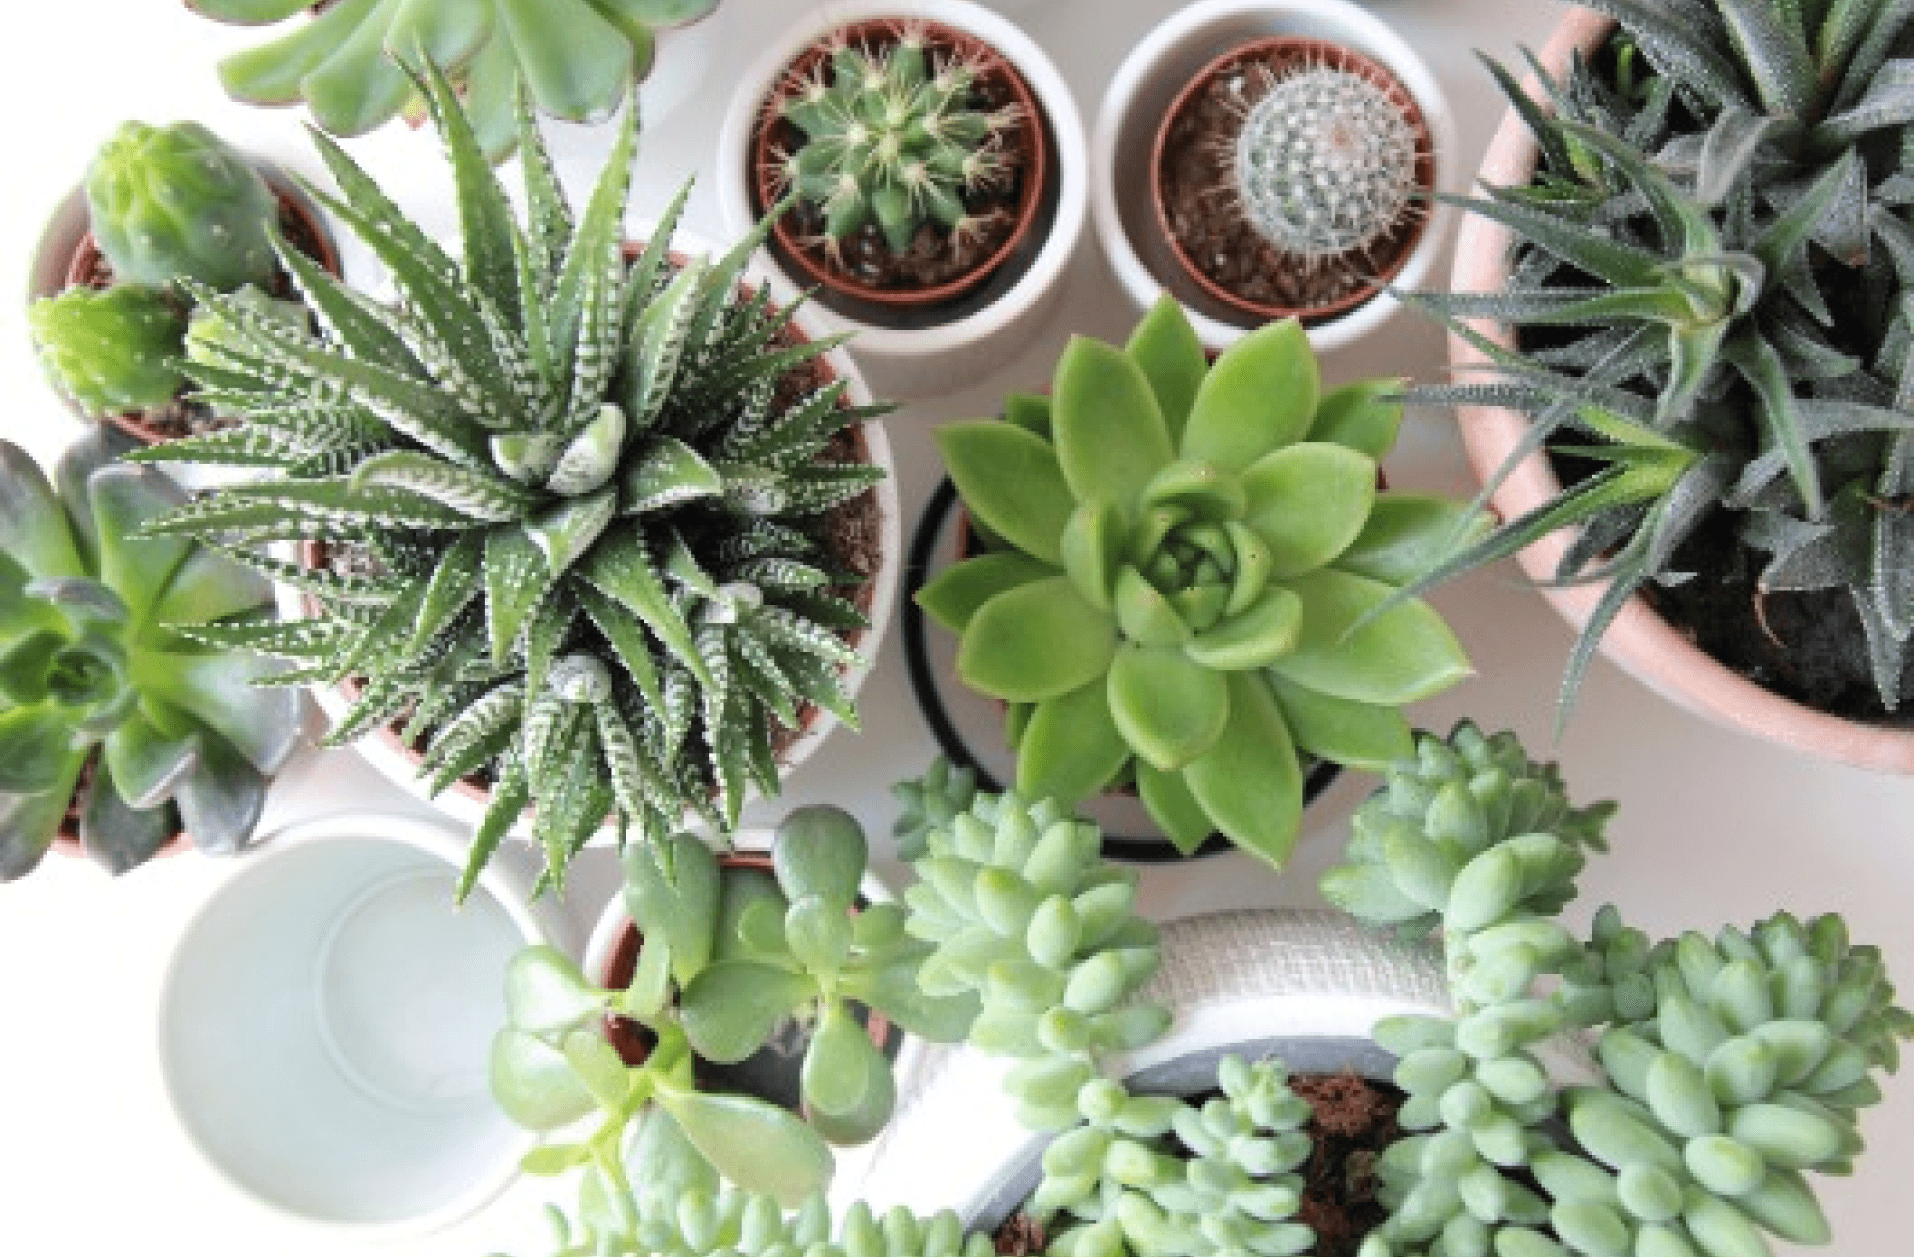 A photo of small succulent plants from above.